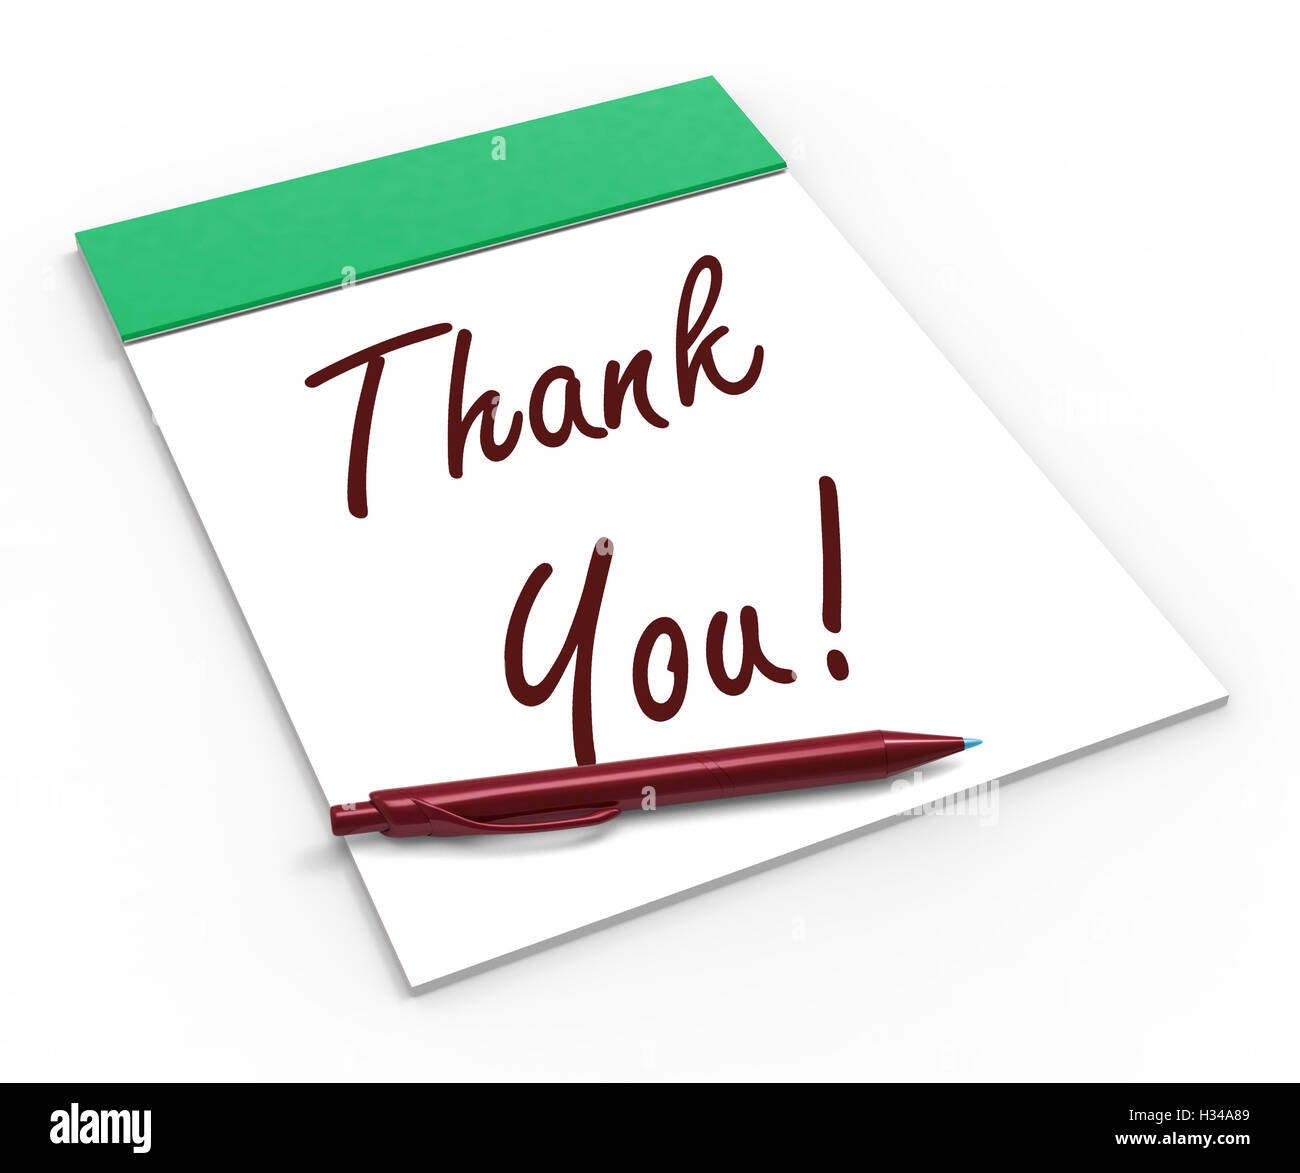 Thank You! Notebook Means Acknowledgment Or Gratefulness Stock Photo